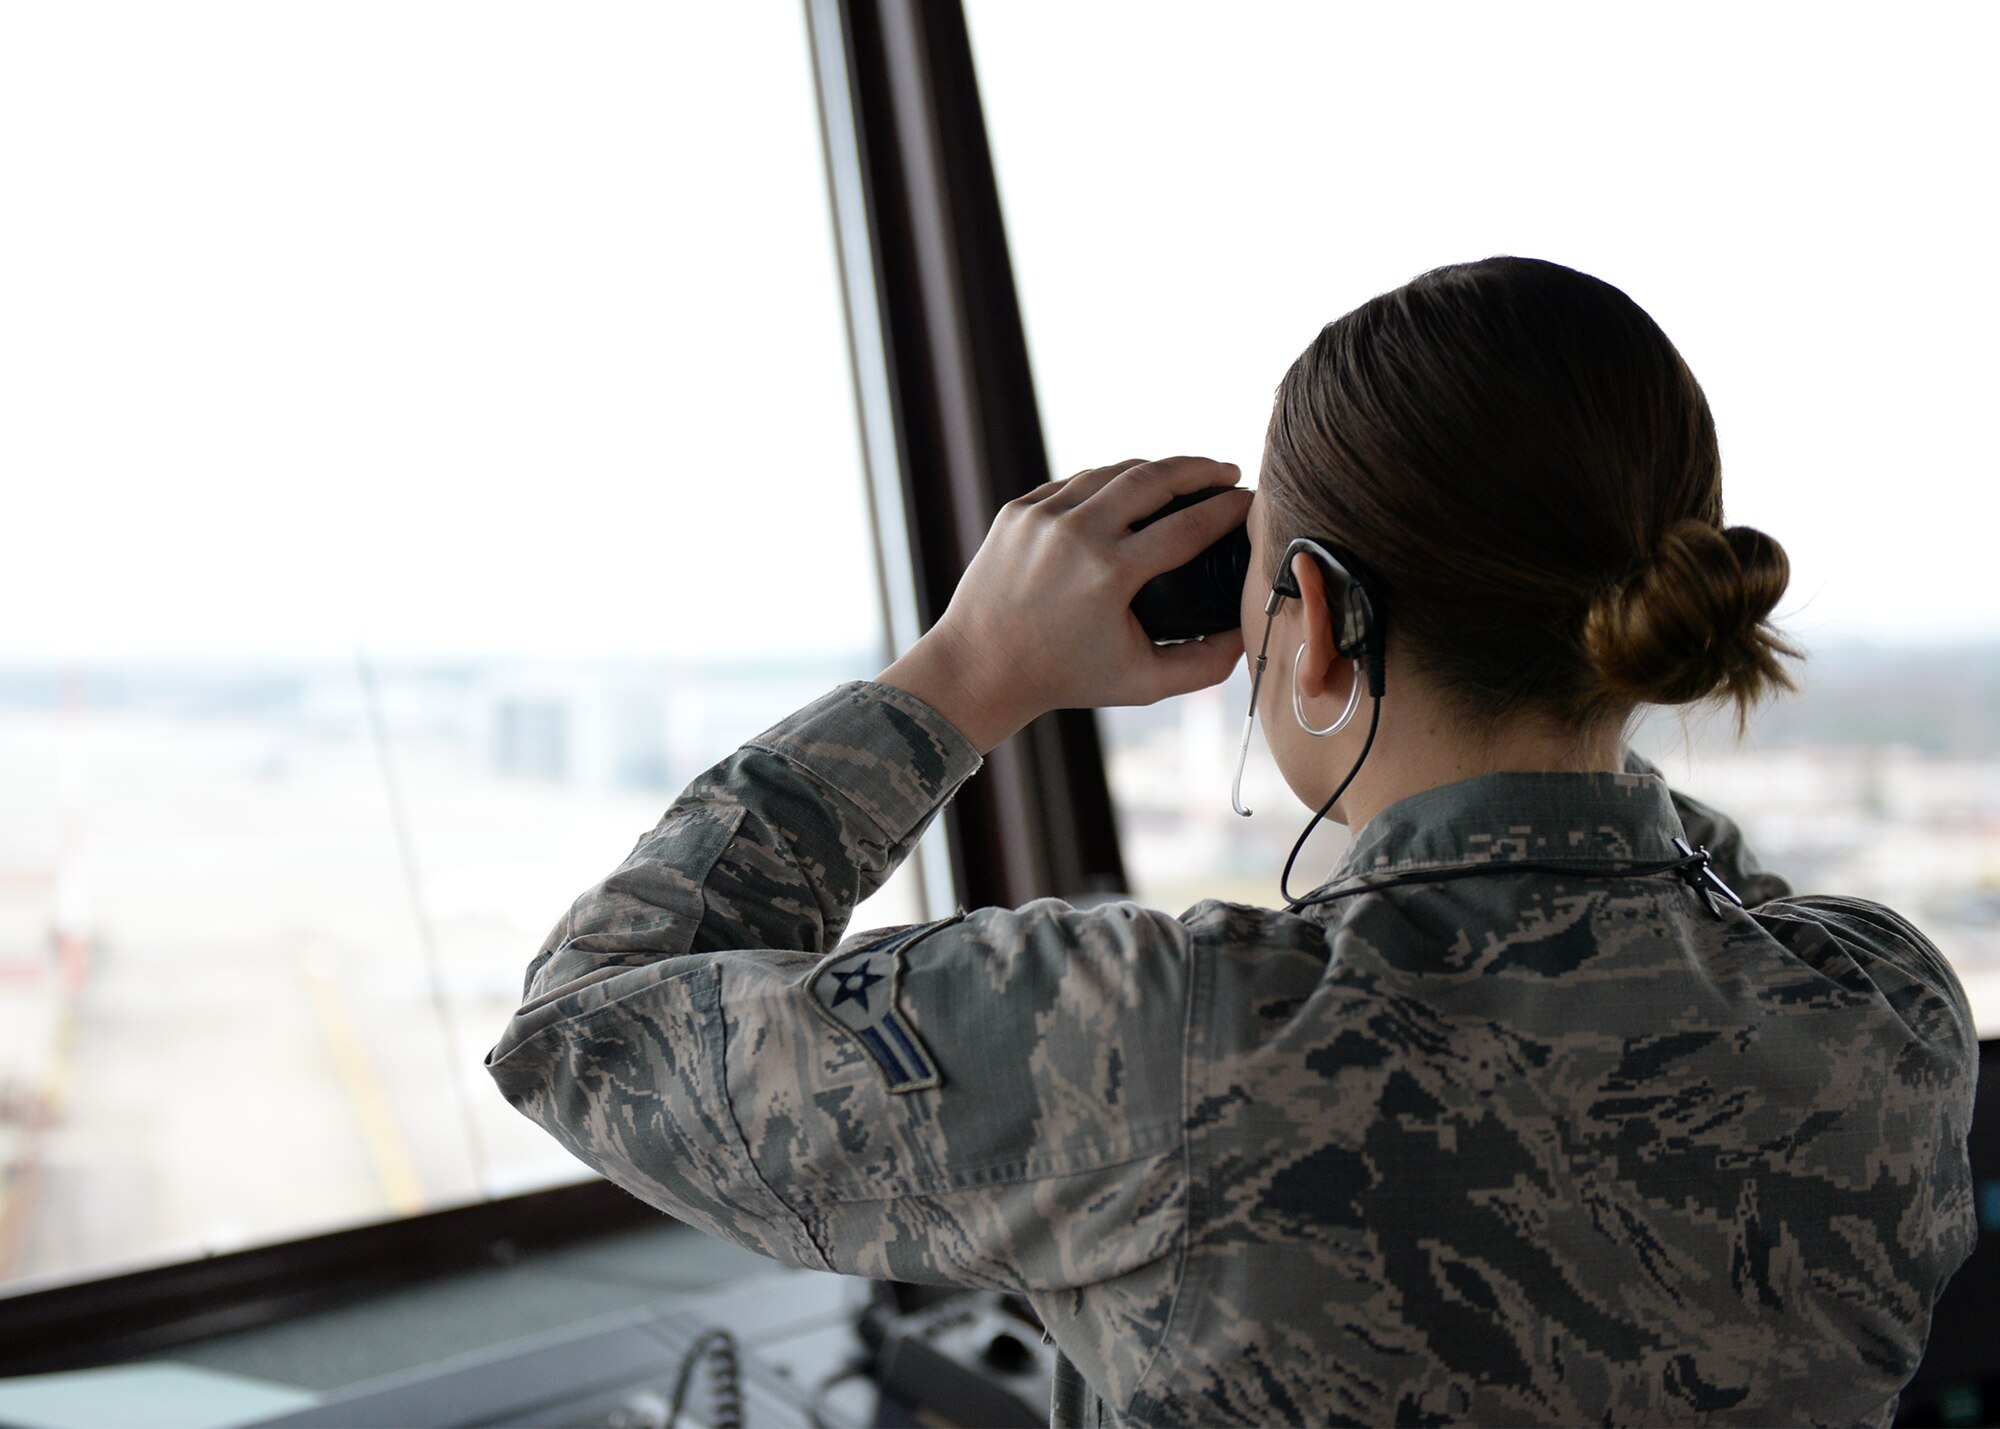 Airman 1st Class Paige Goulette, 86th Operations Support Squadron air traffic controller apprentice, looks out at aircraft at Ramstein Air Base, Germany, Dec. 12, 2016. Air traffic controllers must direct air traffic by providing instructions from radios to aircraft pilots. (U.S. Air Force photo by Senior Airman Jimmie D. Pike)